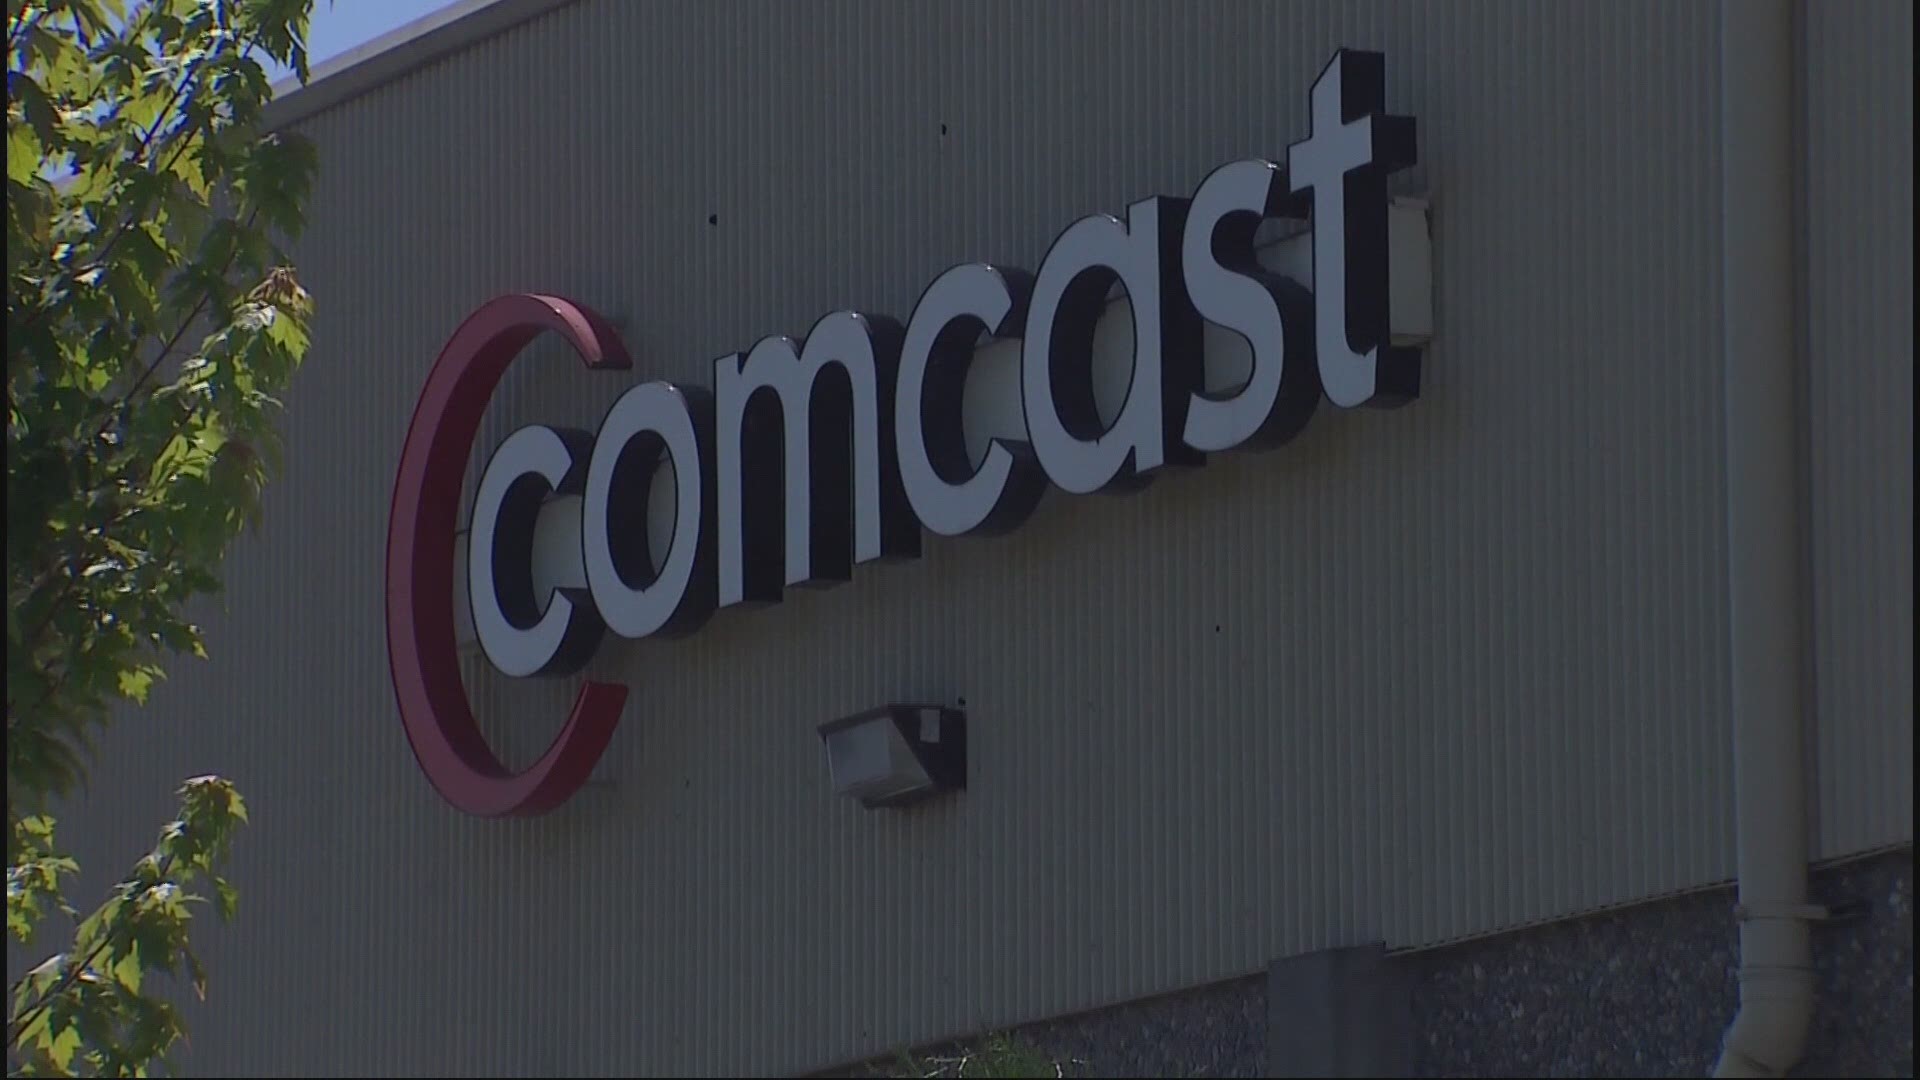 May is small business month and some are getting a boost from Comcast. Joe Raineri explains how they’re able to reach more customers.